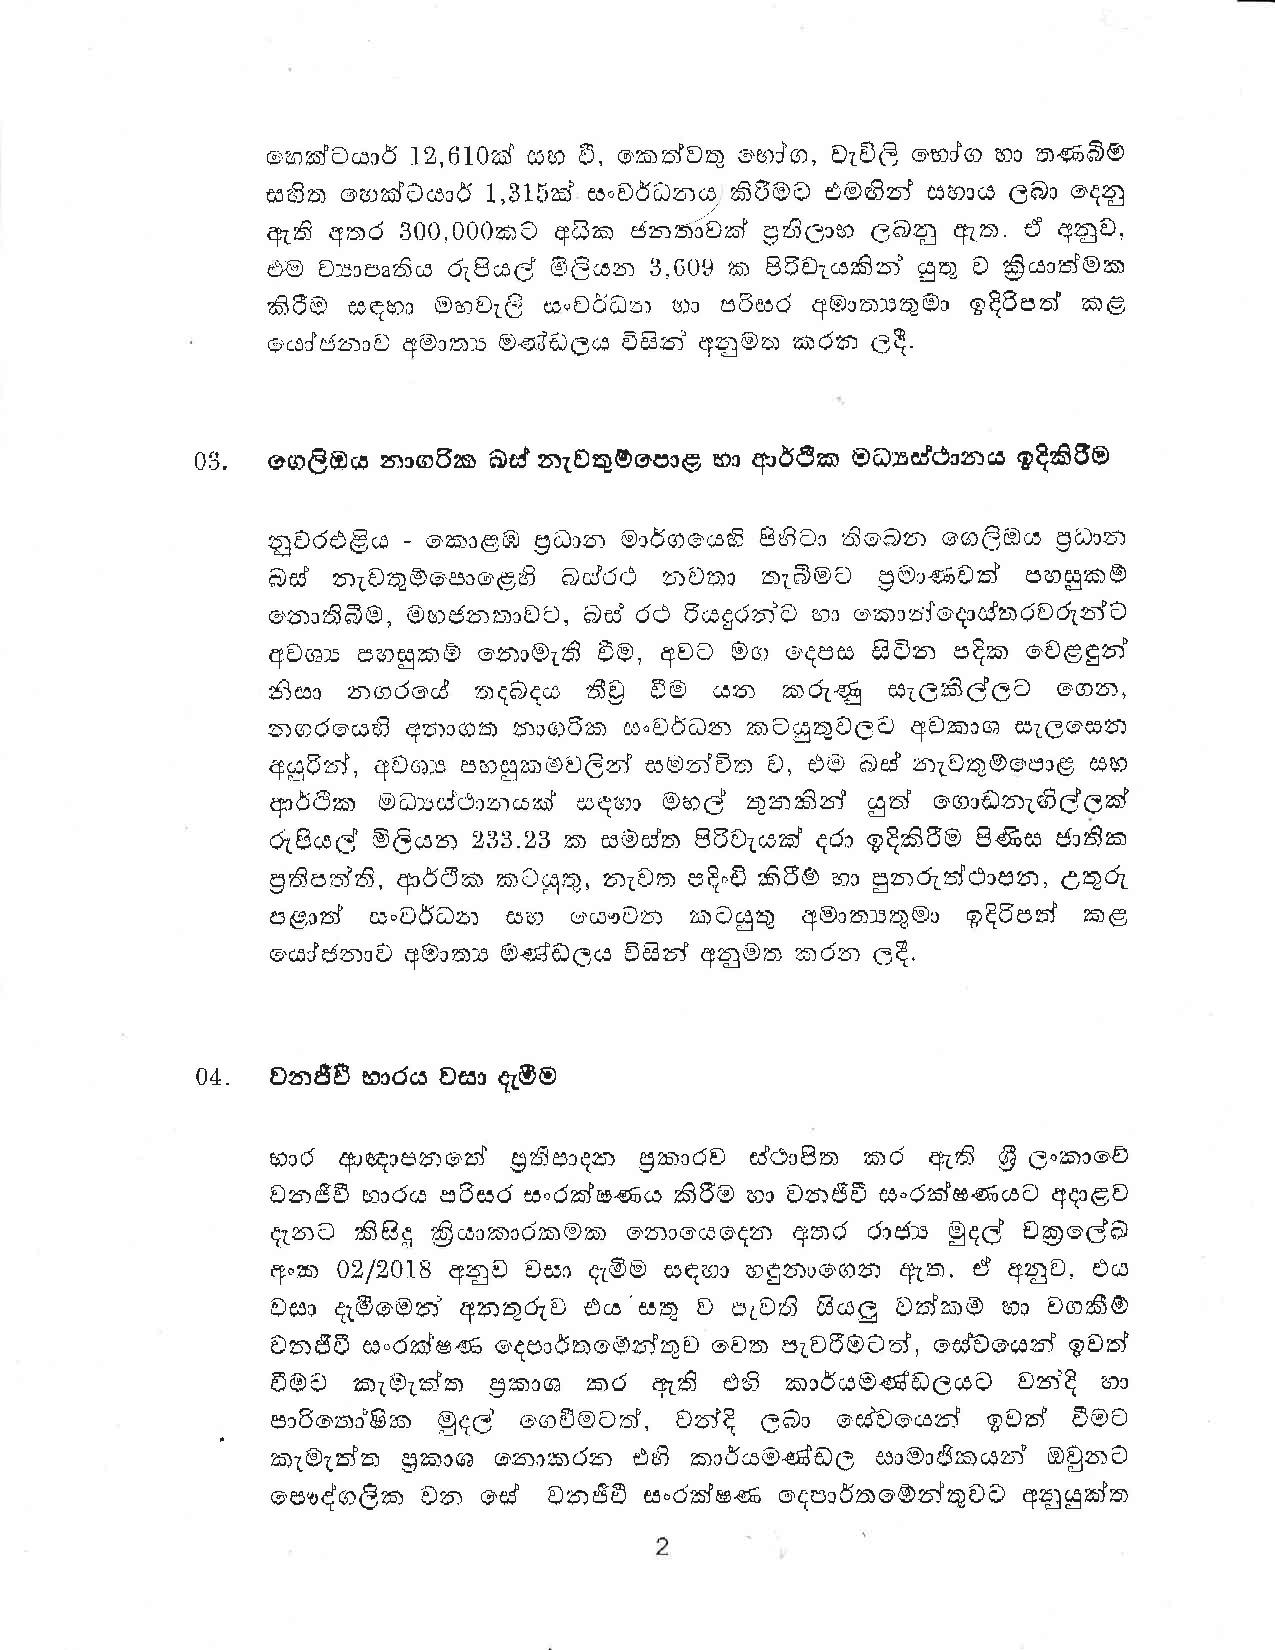 Cabinet Decision on 15.10.2019 page 002